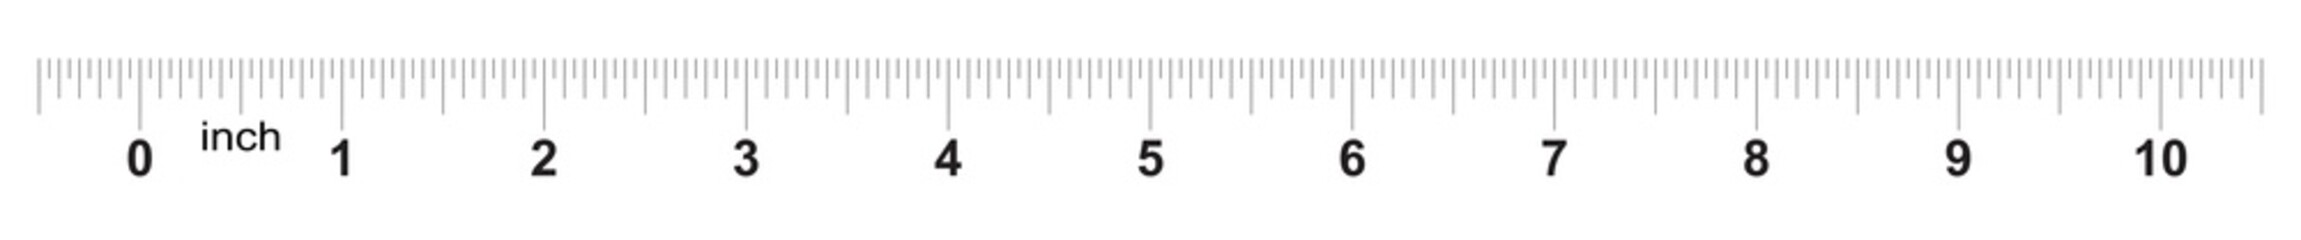 Ruler 10 inches. Metric inch size indicator. Decimal system grid. Measuring tool